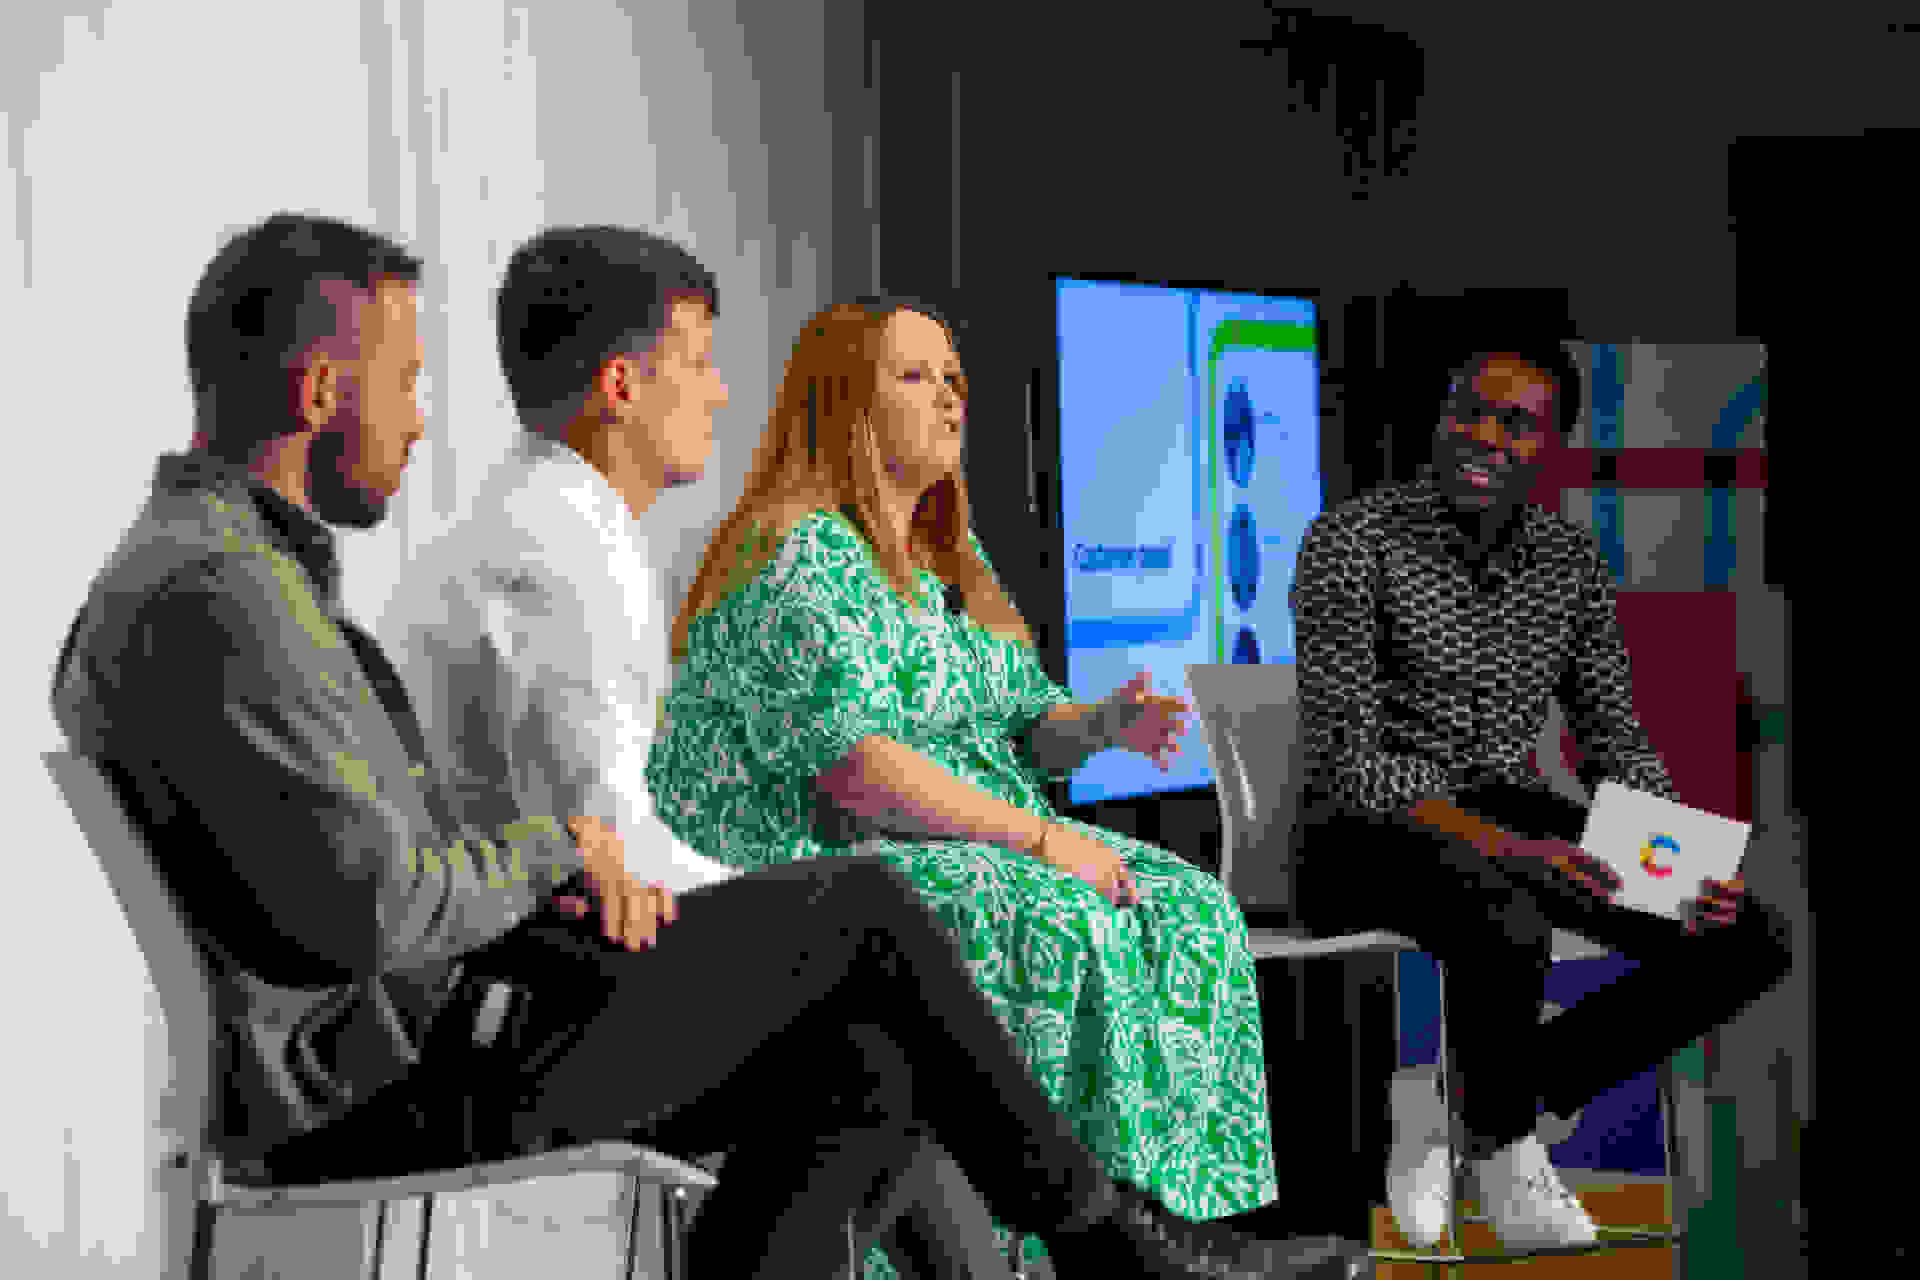 Ready with a series of probing questions around this fascinating topic, Kris moderated a terrific customer panel with Emma Murray, Senior Product Manager at M&S; Ali Corless, Product Manager at F1; and Elliott King, Director of Content at Unmind.